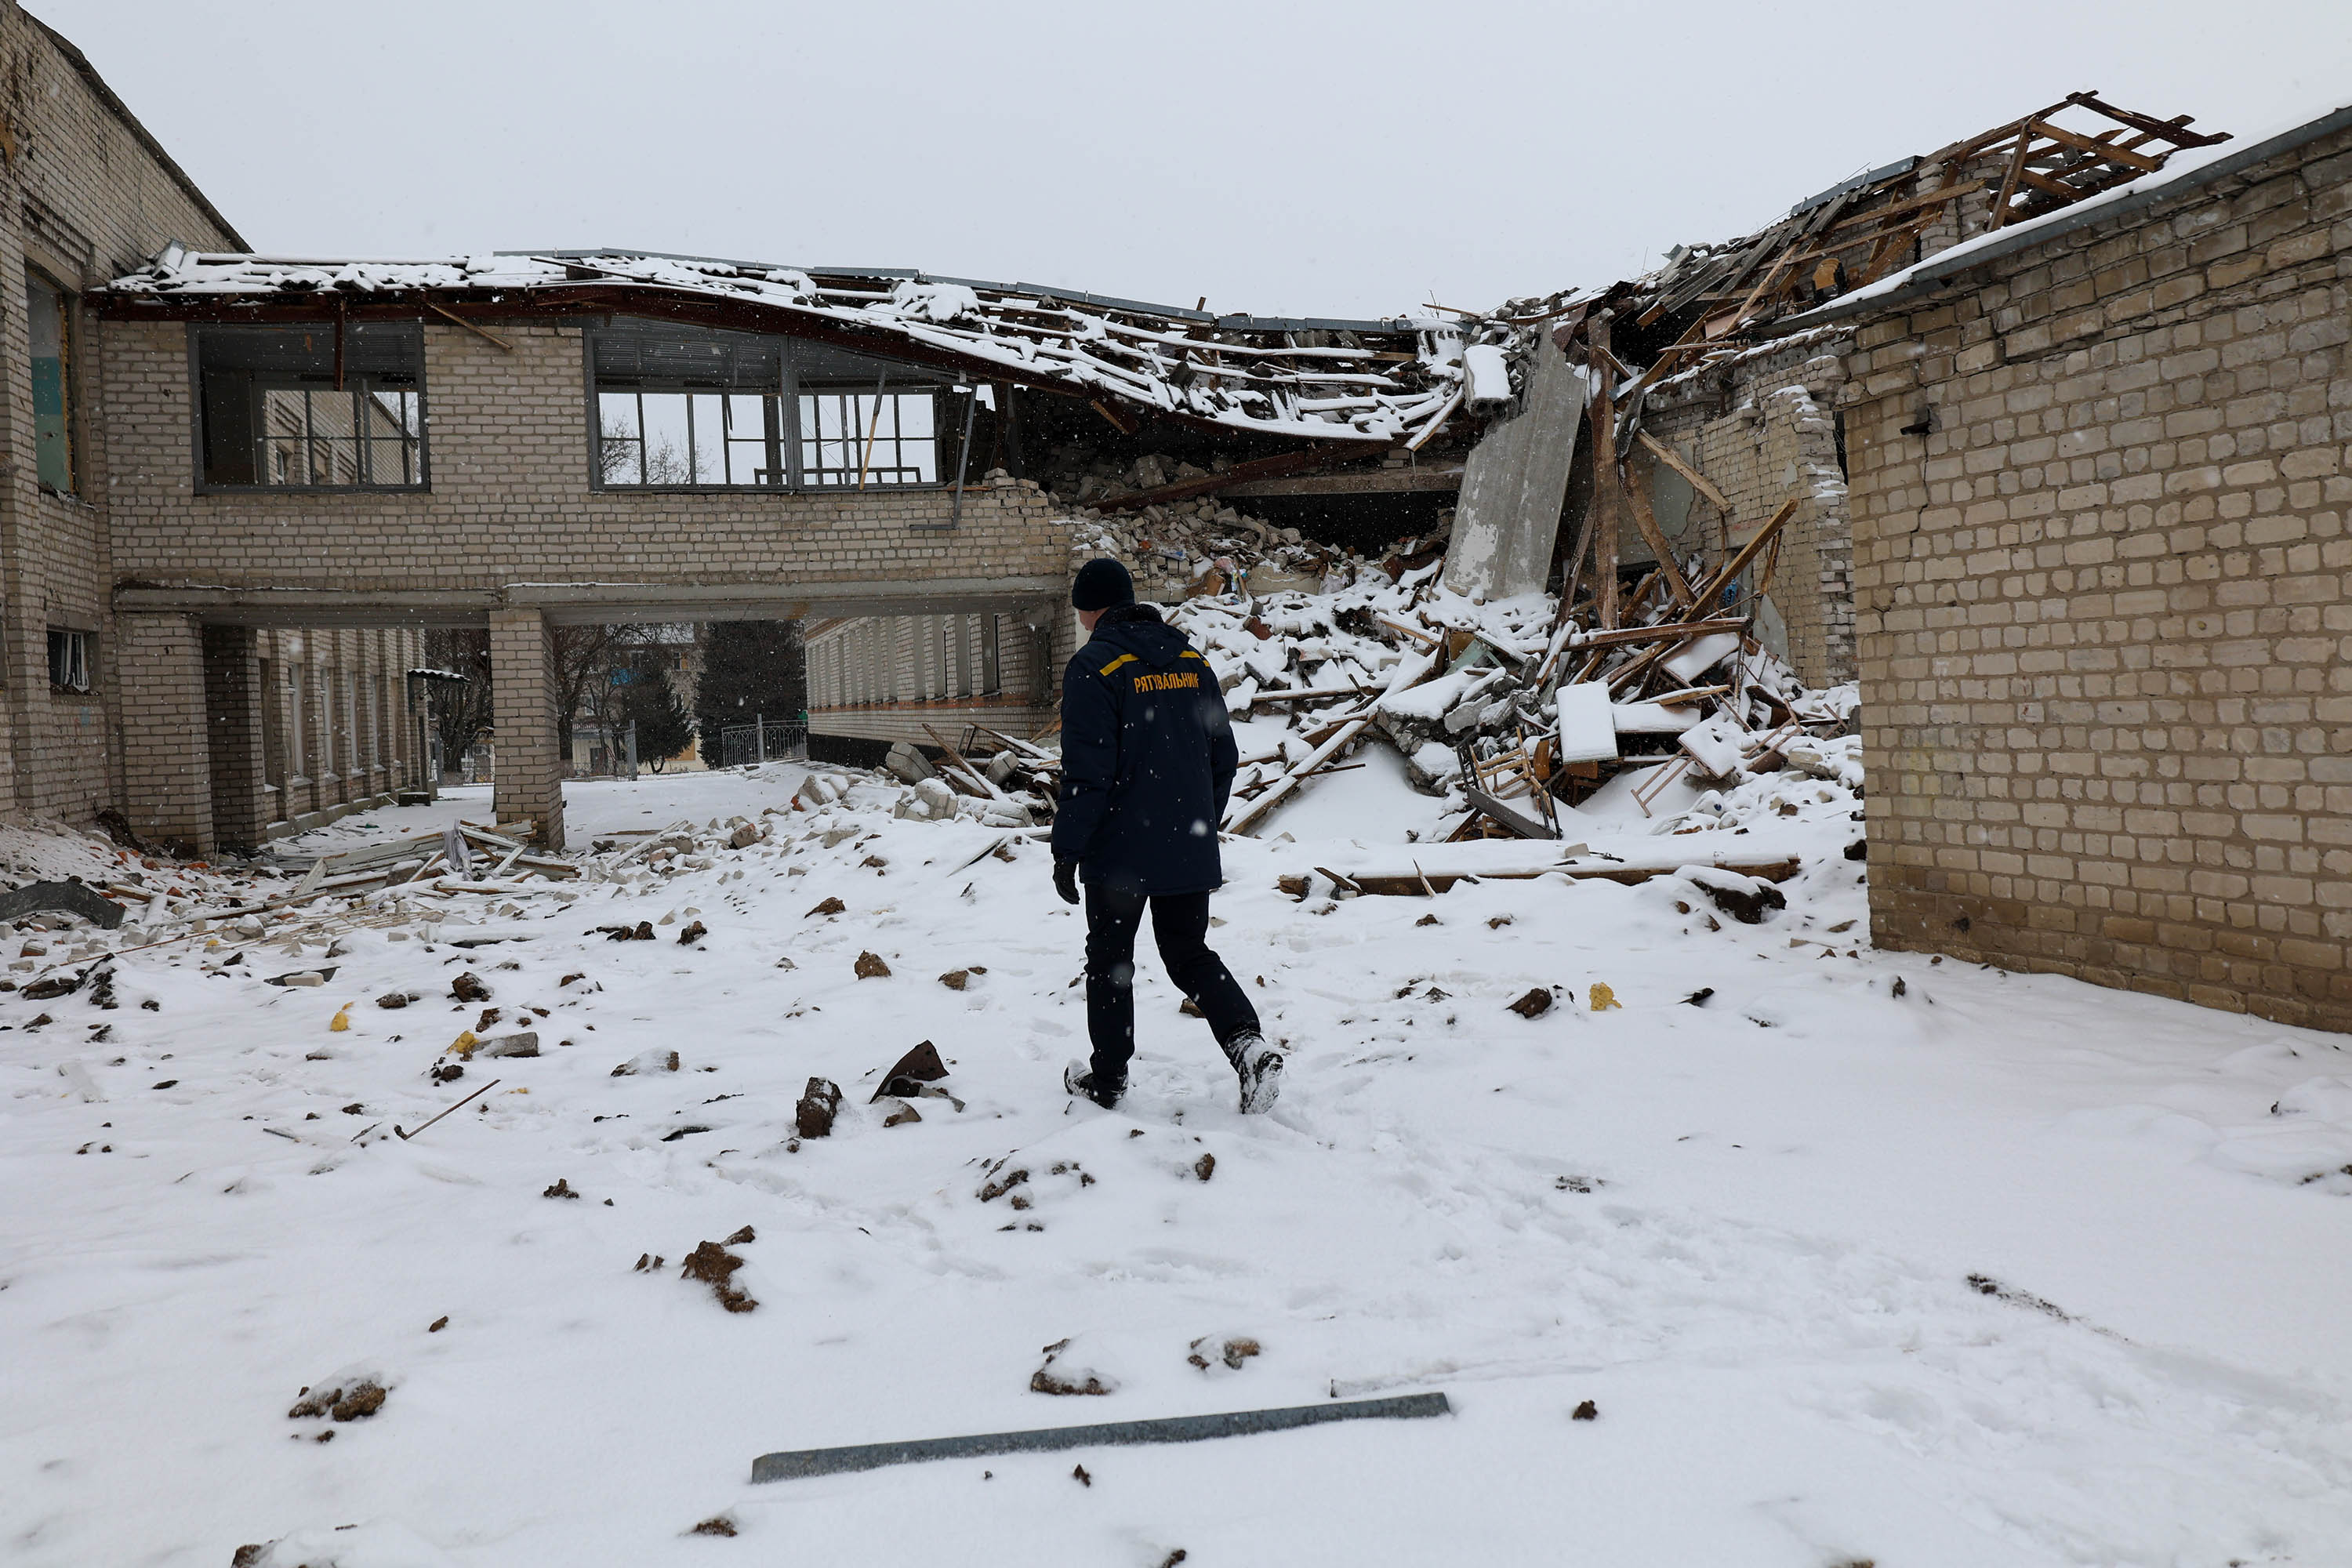 A Ukrainian rescuer walks through the remnants of a destroyed building in Kupyansk, Ukraine, on February 13 